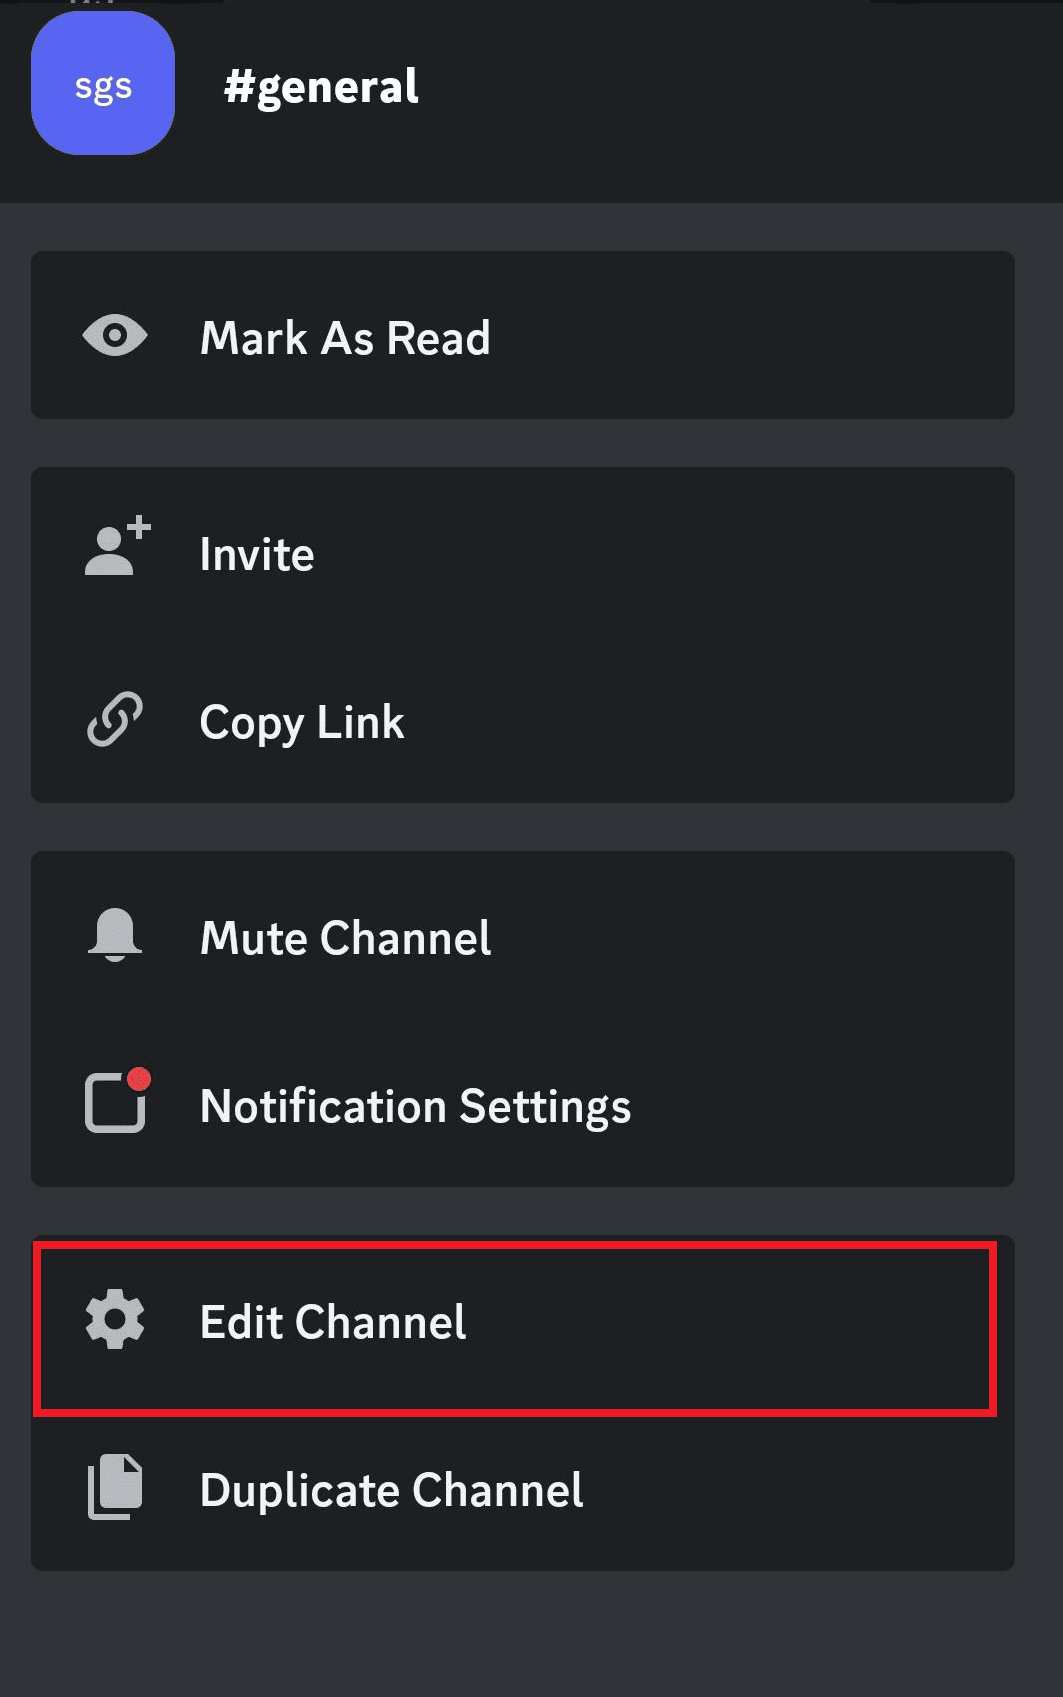 Tap Edit Channel from the menu.